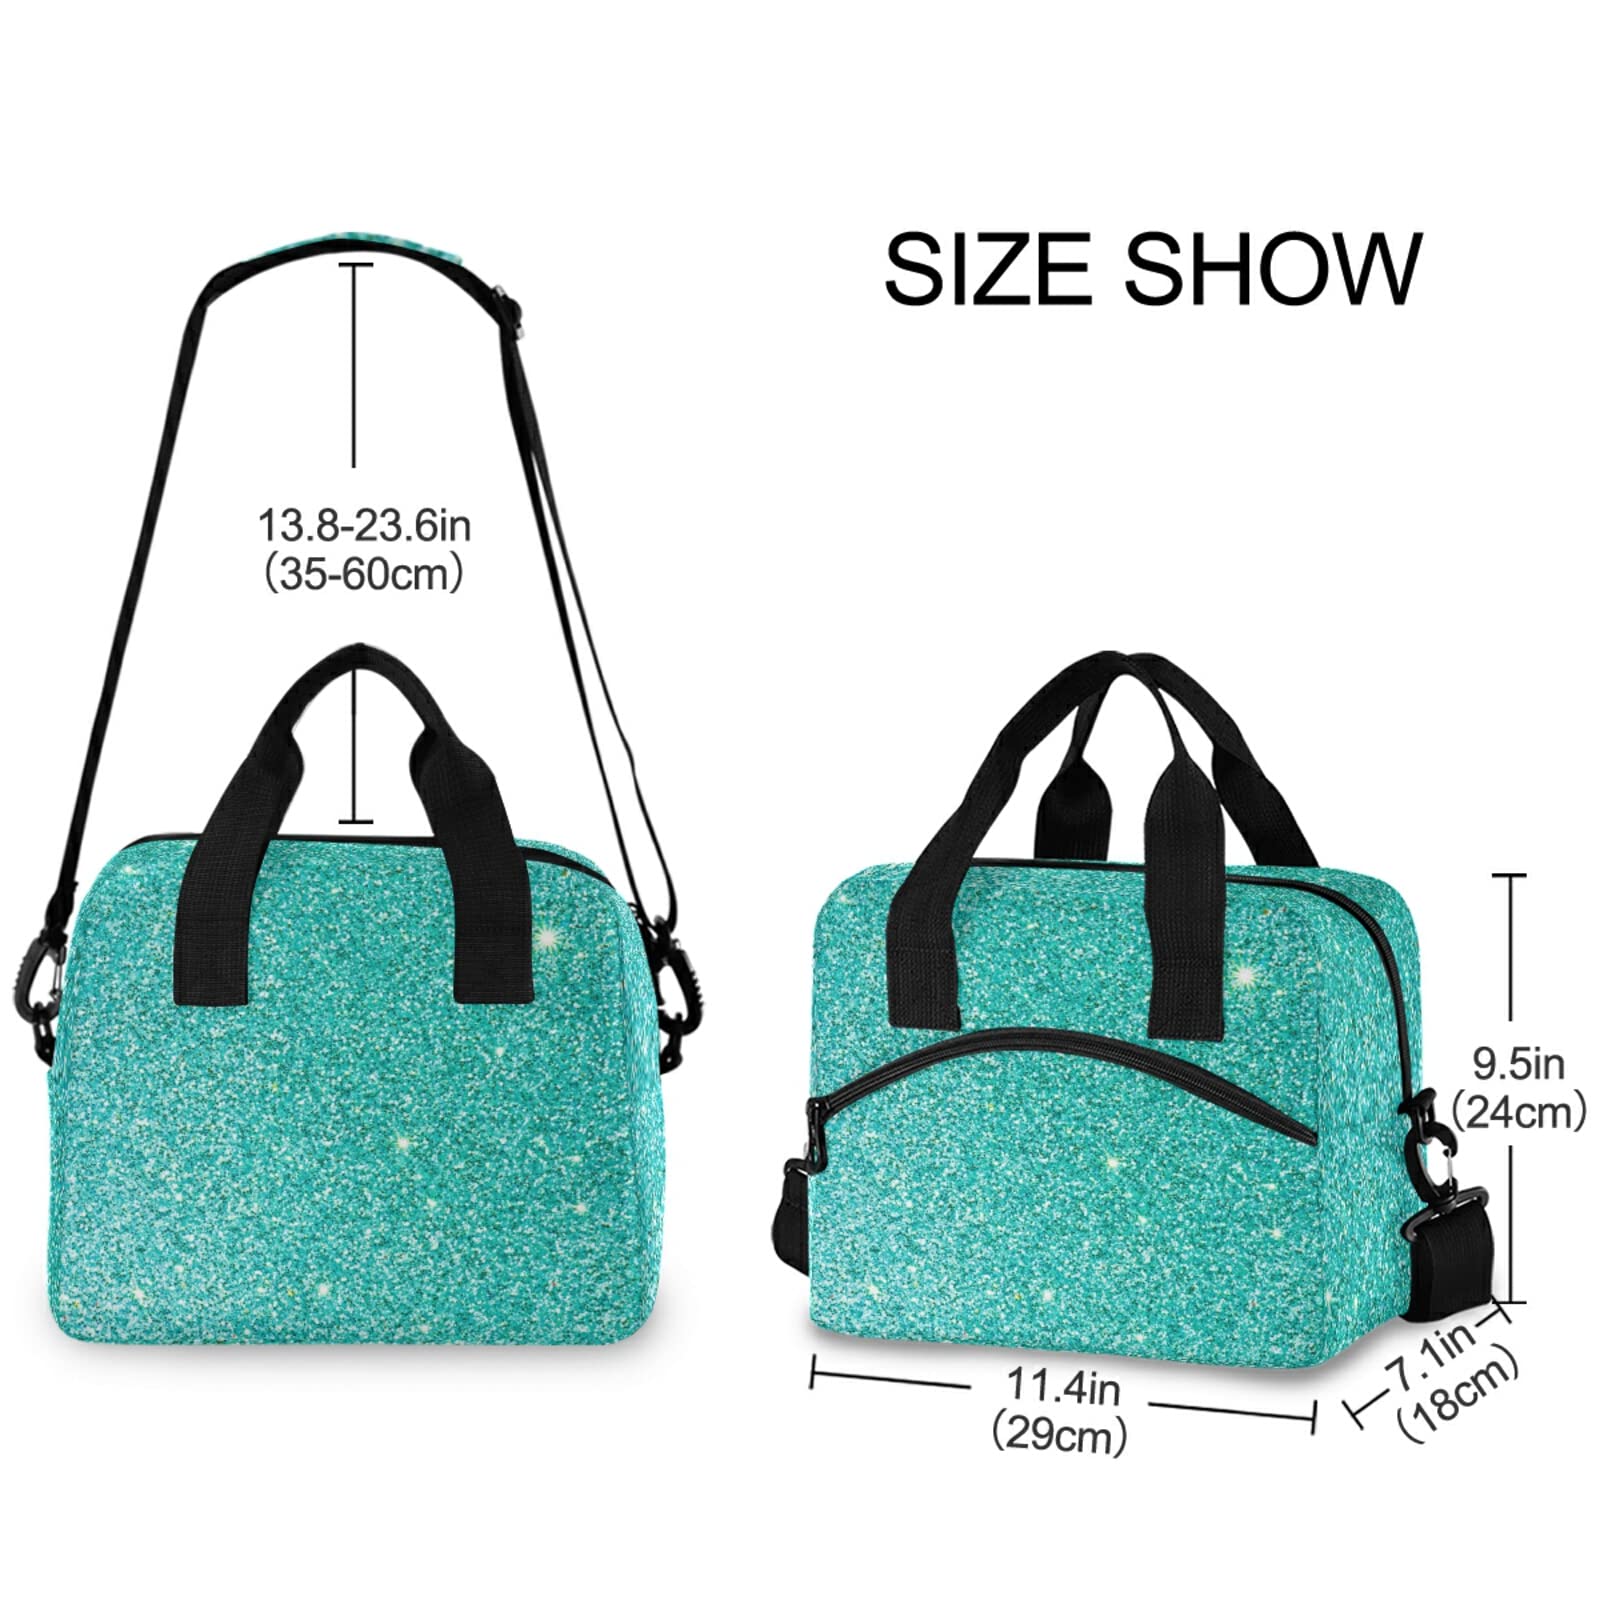 ALAZA Teal Glitter Sparkle Lunch Bags for Women Leakproof Lunch Bag lunch Box Lunch Cooler Bag(228be3b)